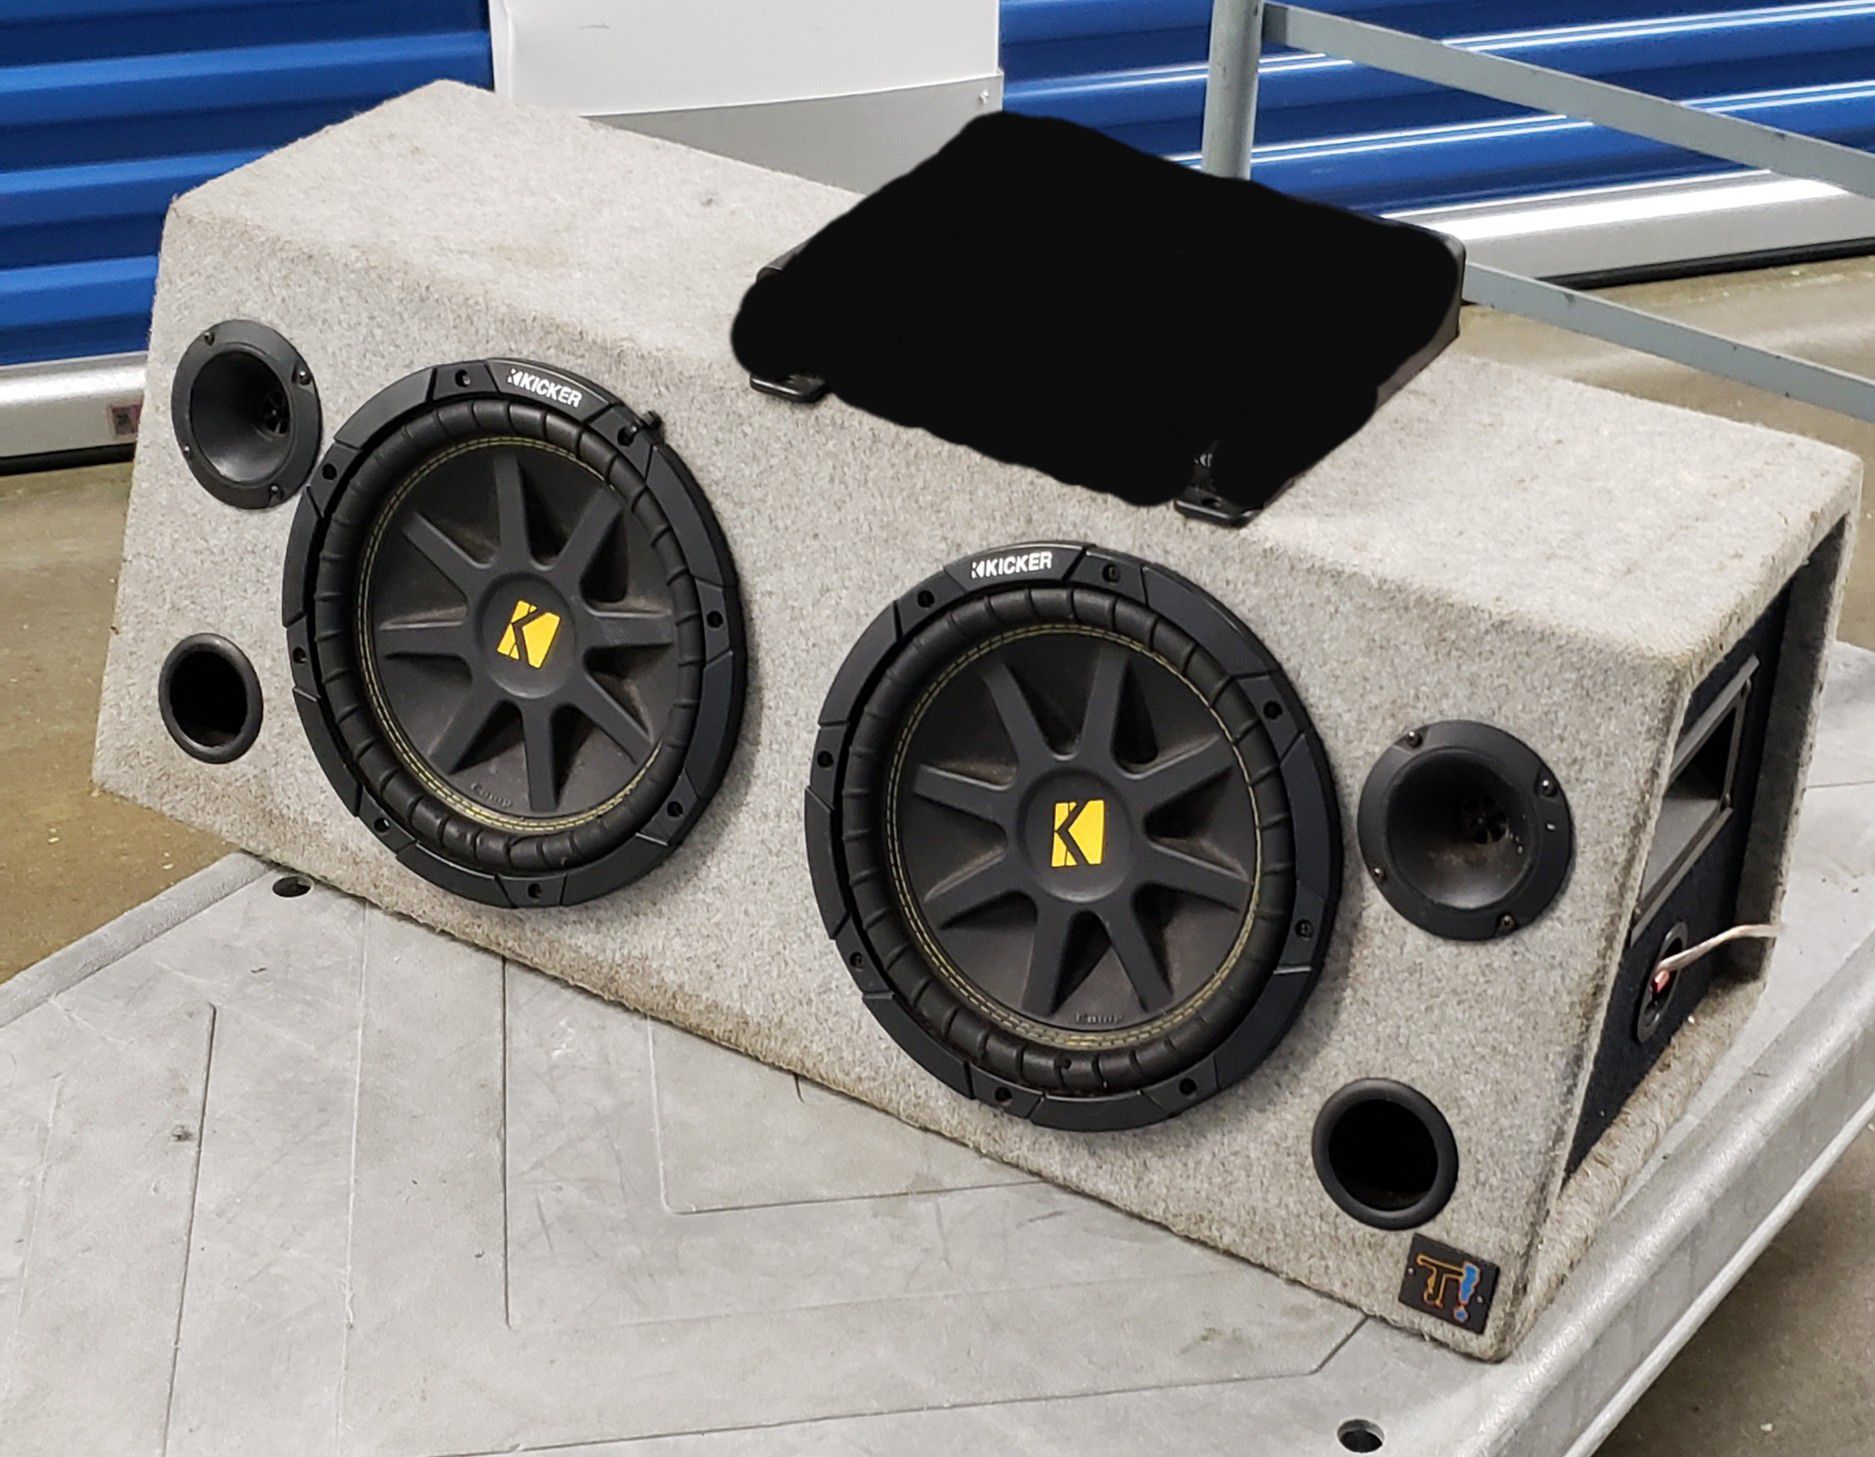 Kicker 12" Car Subwoofers Enclosure - The 12" Speakers are Busted